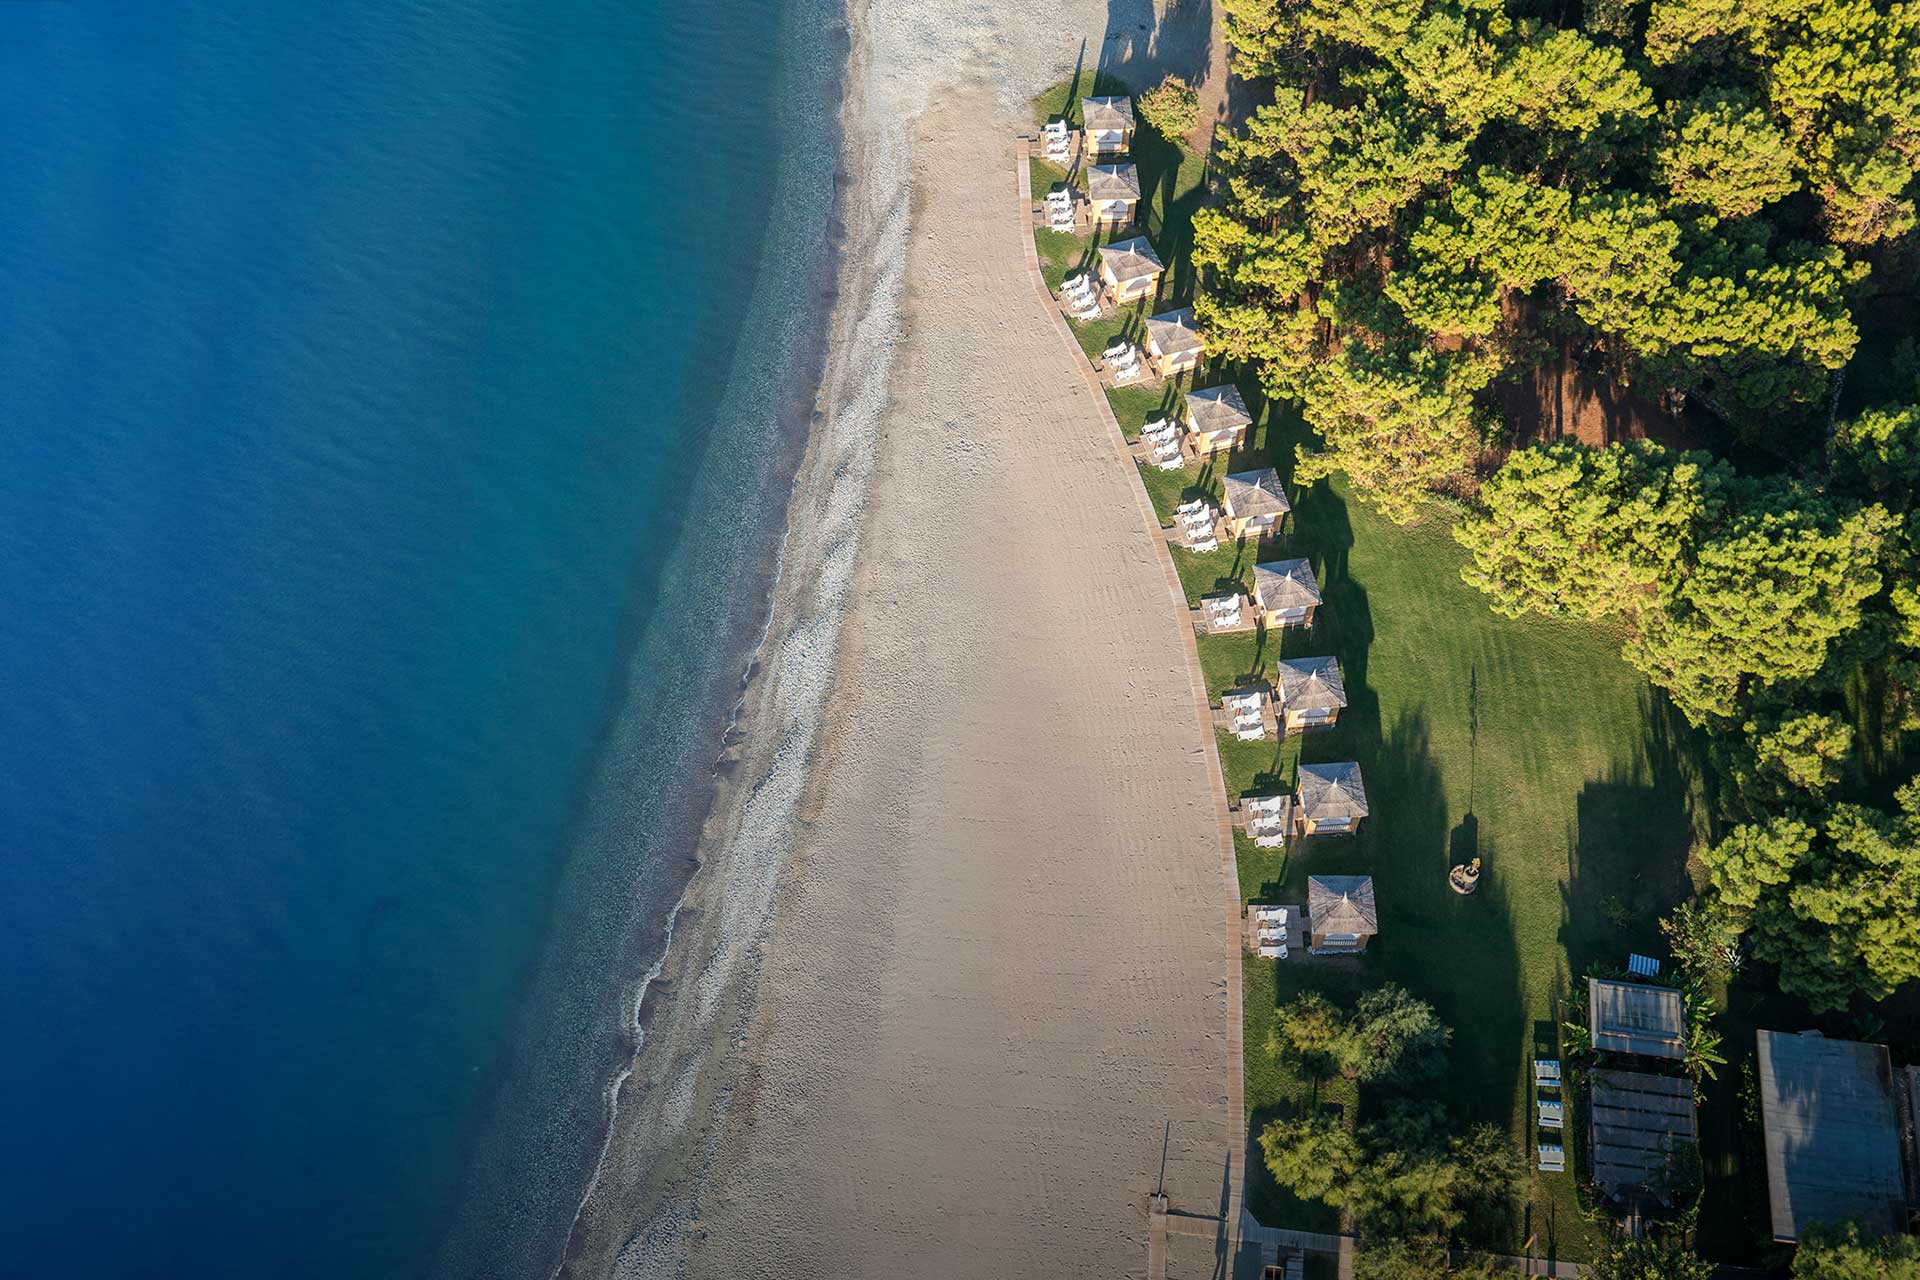 STARTED TO OPEN ITS HOTELS AS OF JUNE 5, BARUT HOTELS COMPLETED OPENING OF ITS HOTELS